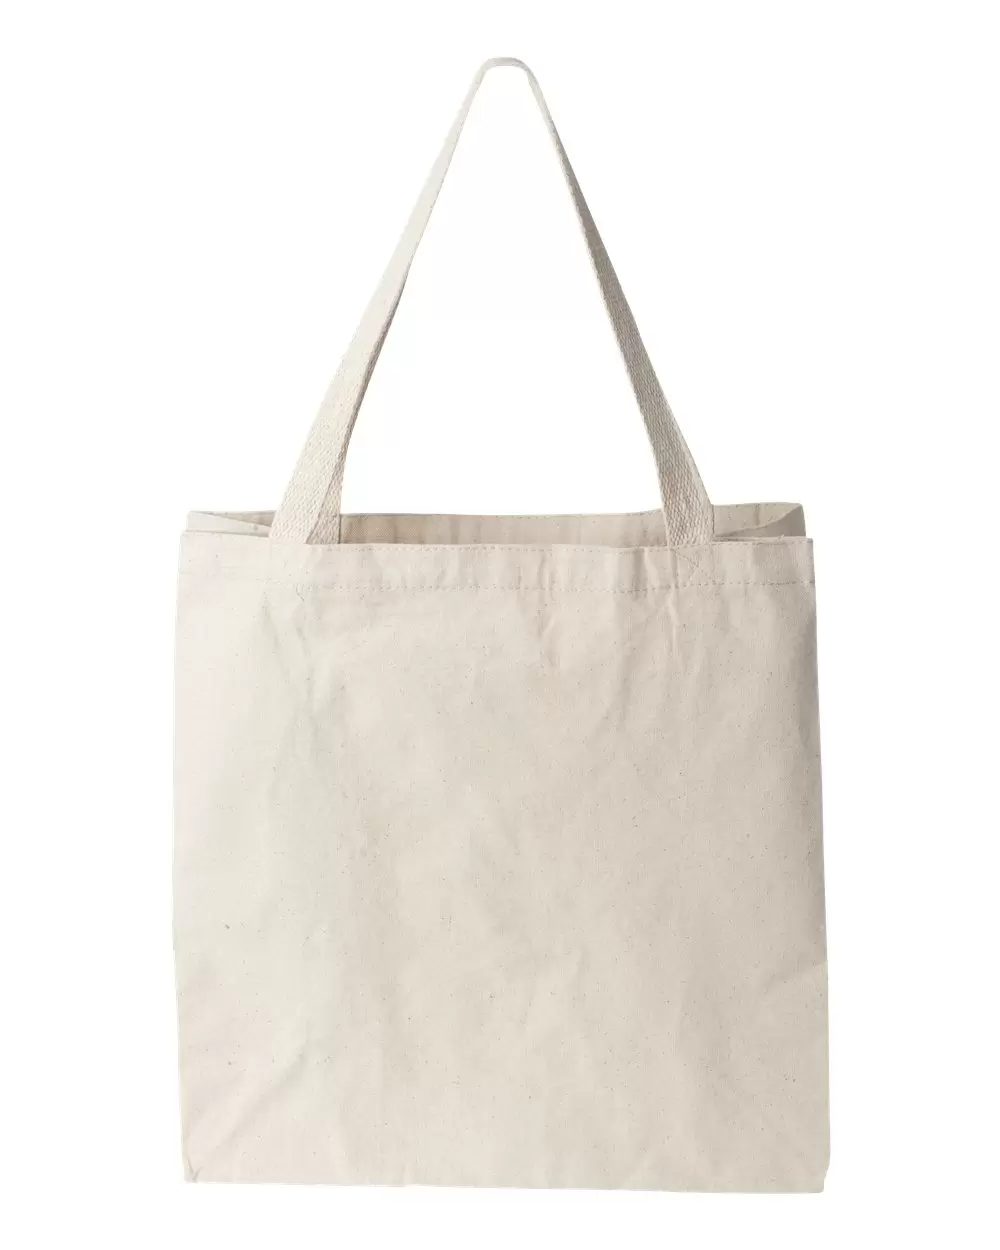 8503 Liberty Bags 12 Ounce Cotton Canvas Tote Bag - From $2.45